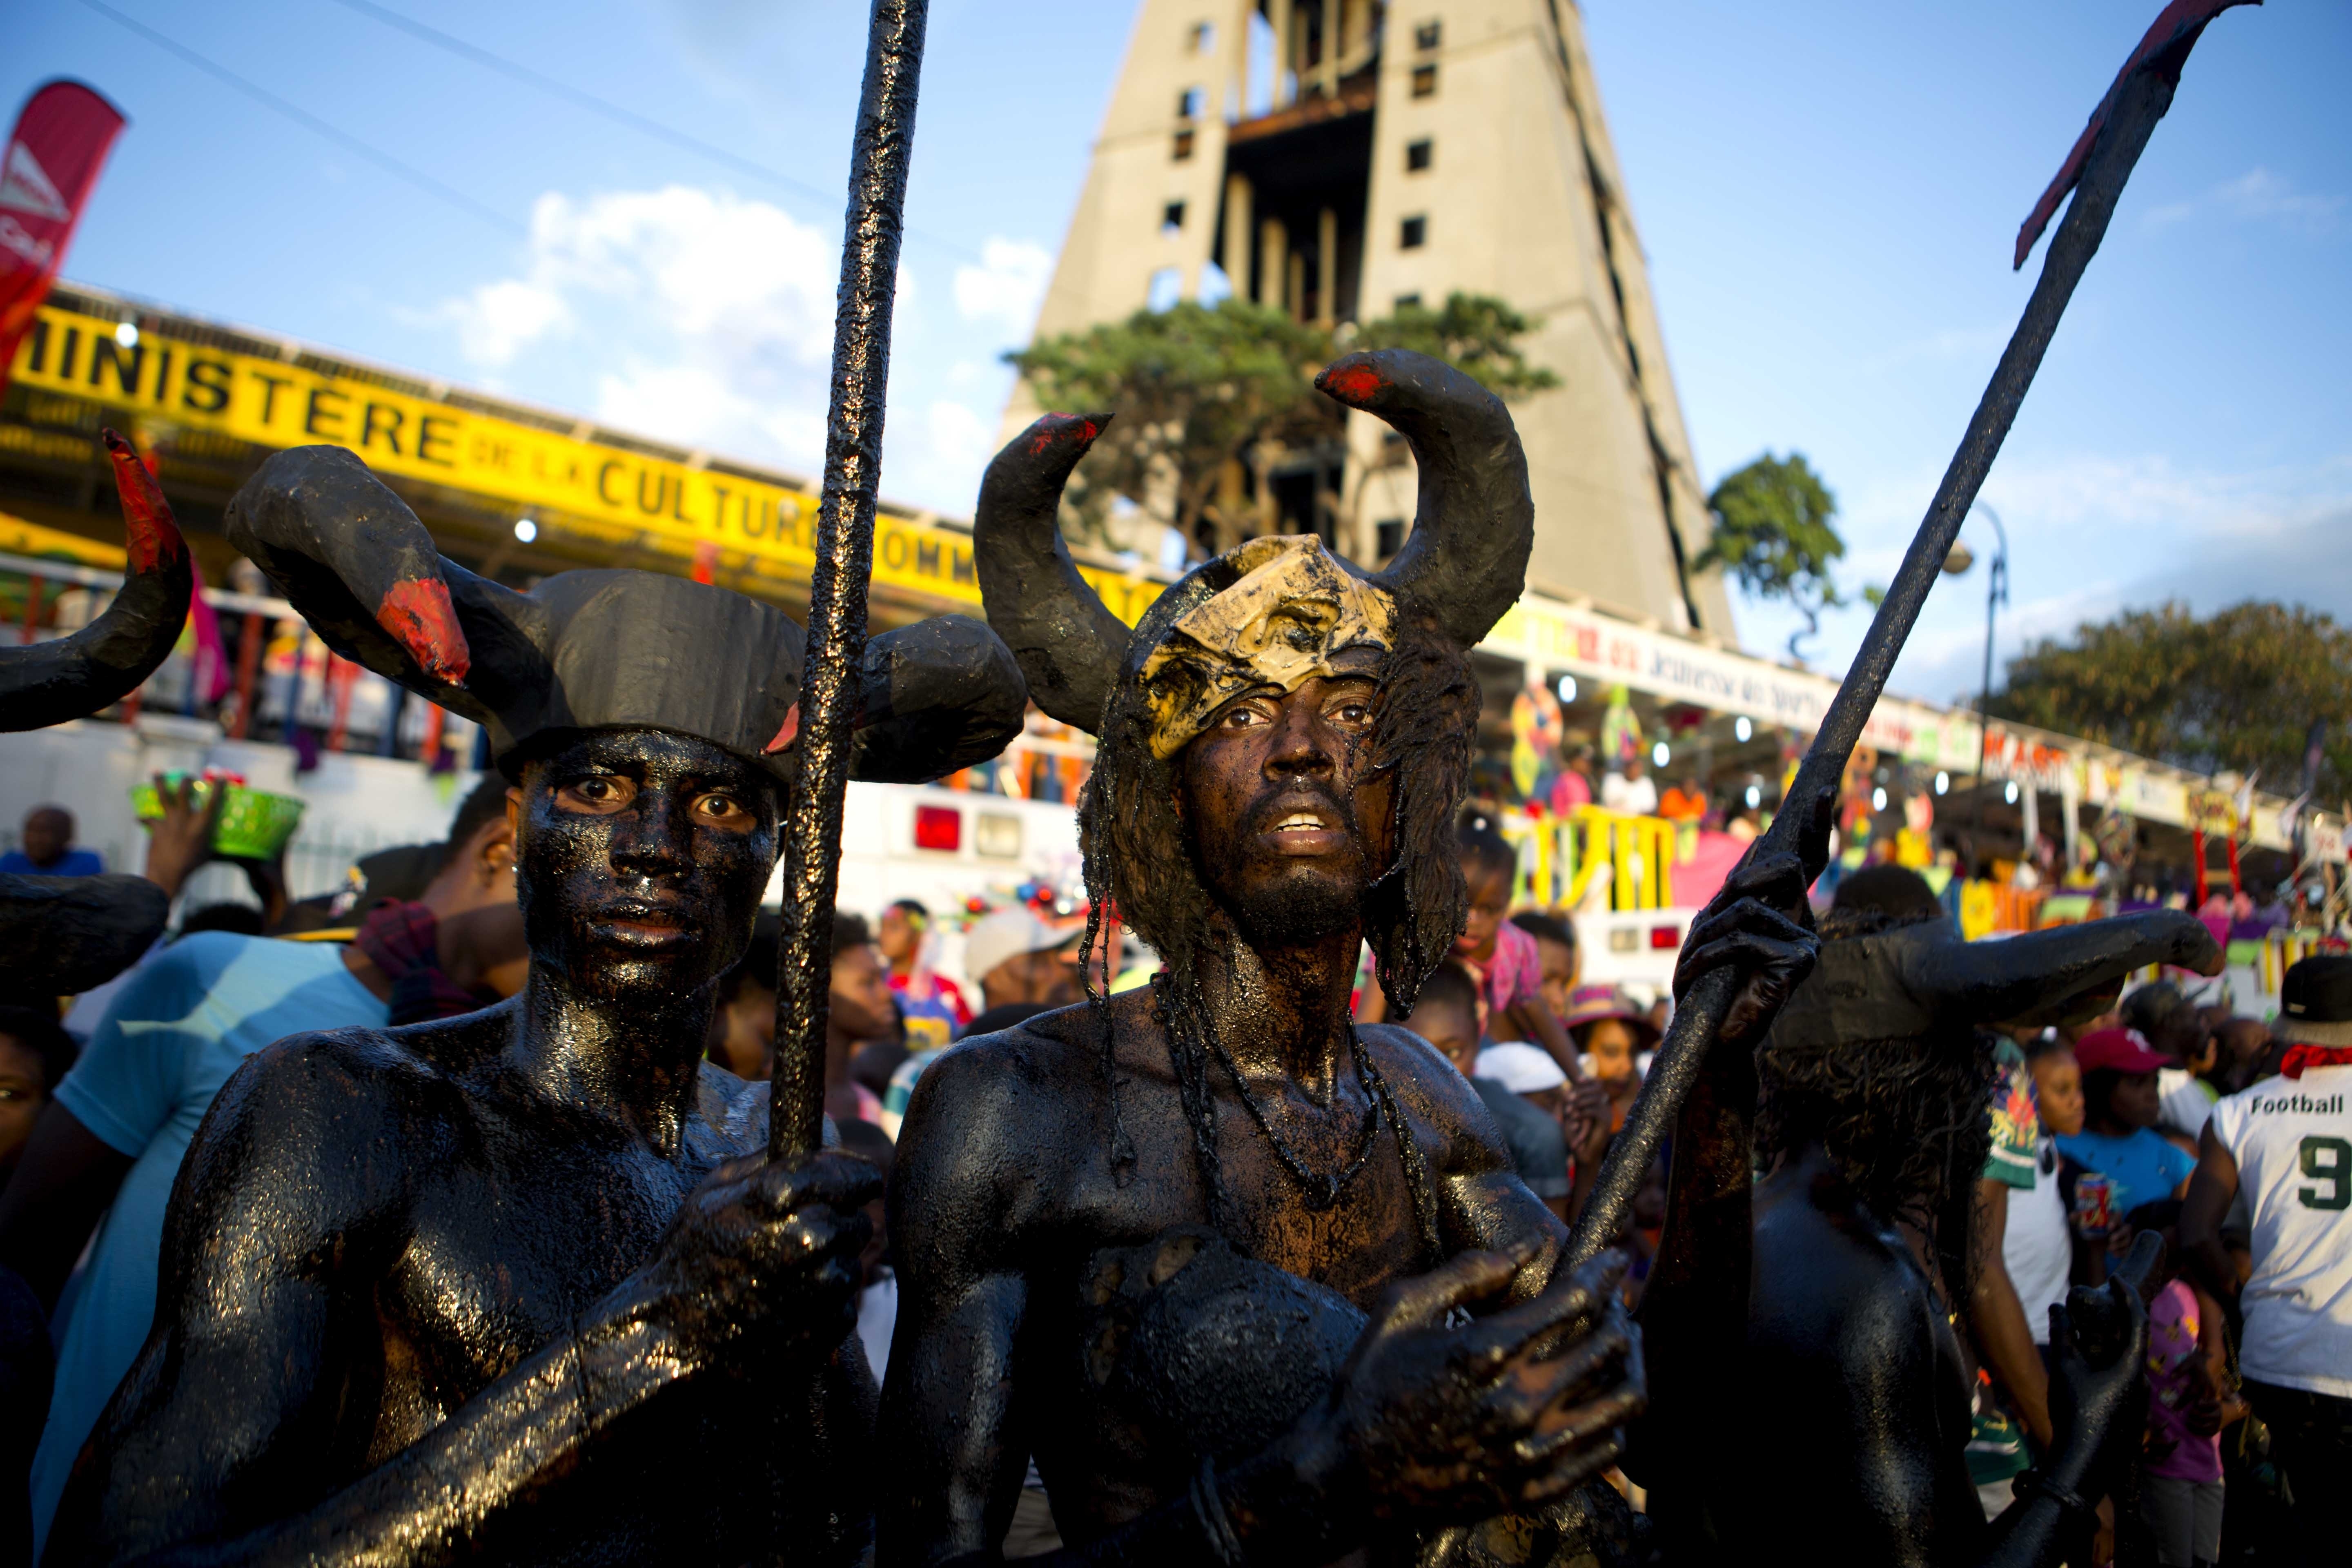 Revelers dressed as devils and with their bodies smothered with clay mud and oil, parade through the streets during Carnival in Port-au-Prince, Haiti, Monday, Feb. 12, 2018. (AP Photo/Dieu Nalio Chery)